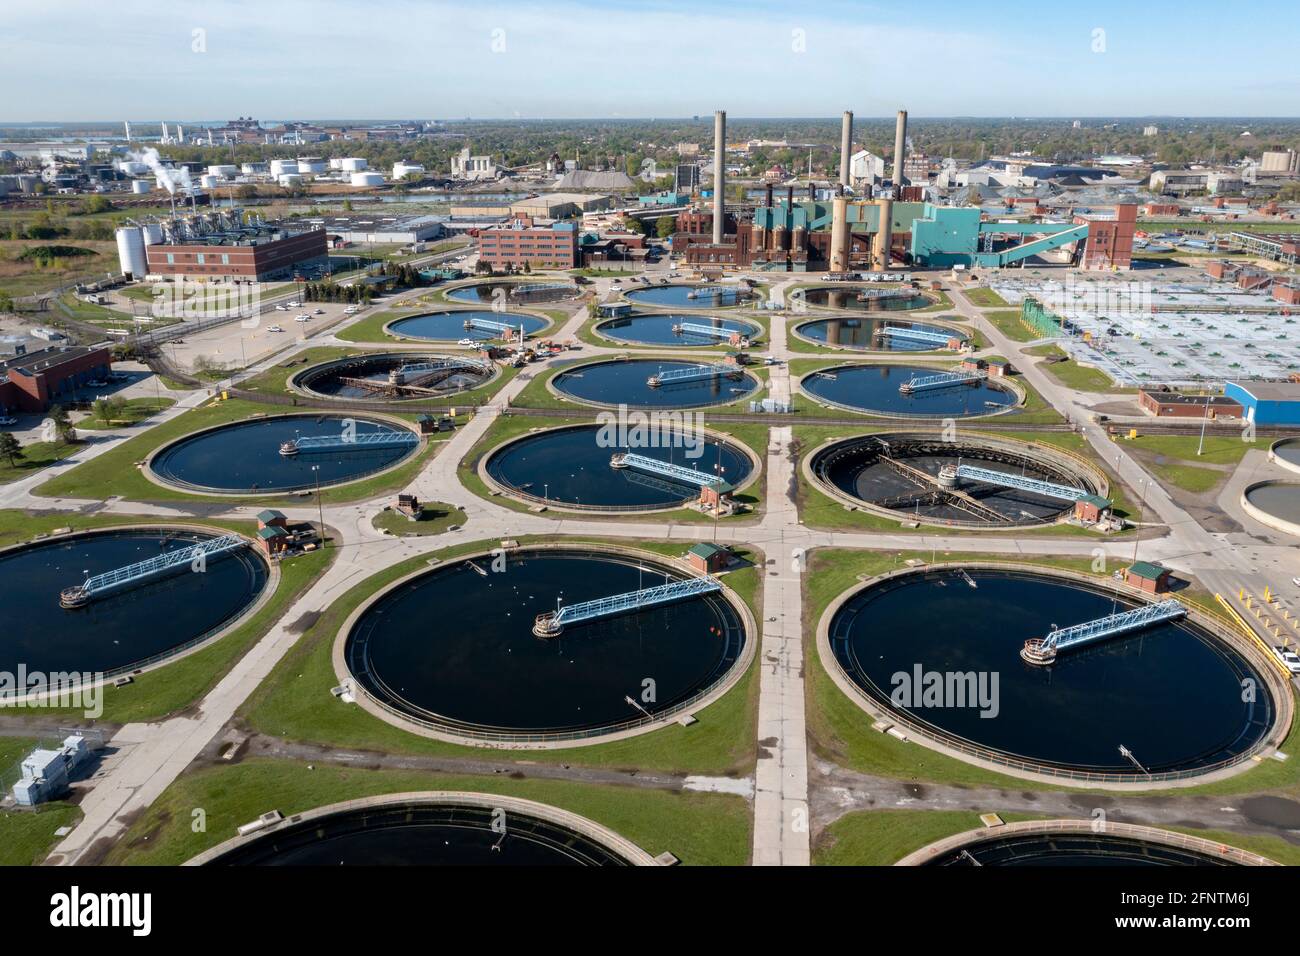 Detroit, Michigan - The Great Lakes Water Authority's sewage treatment plant, which serves Detroit and 76 other southeastern Michigan communities. The Stock Photo